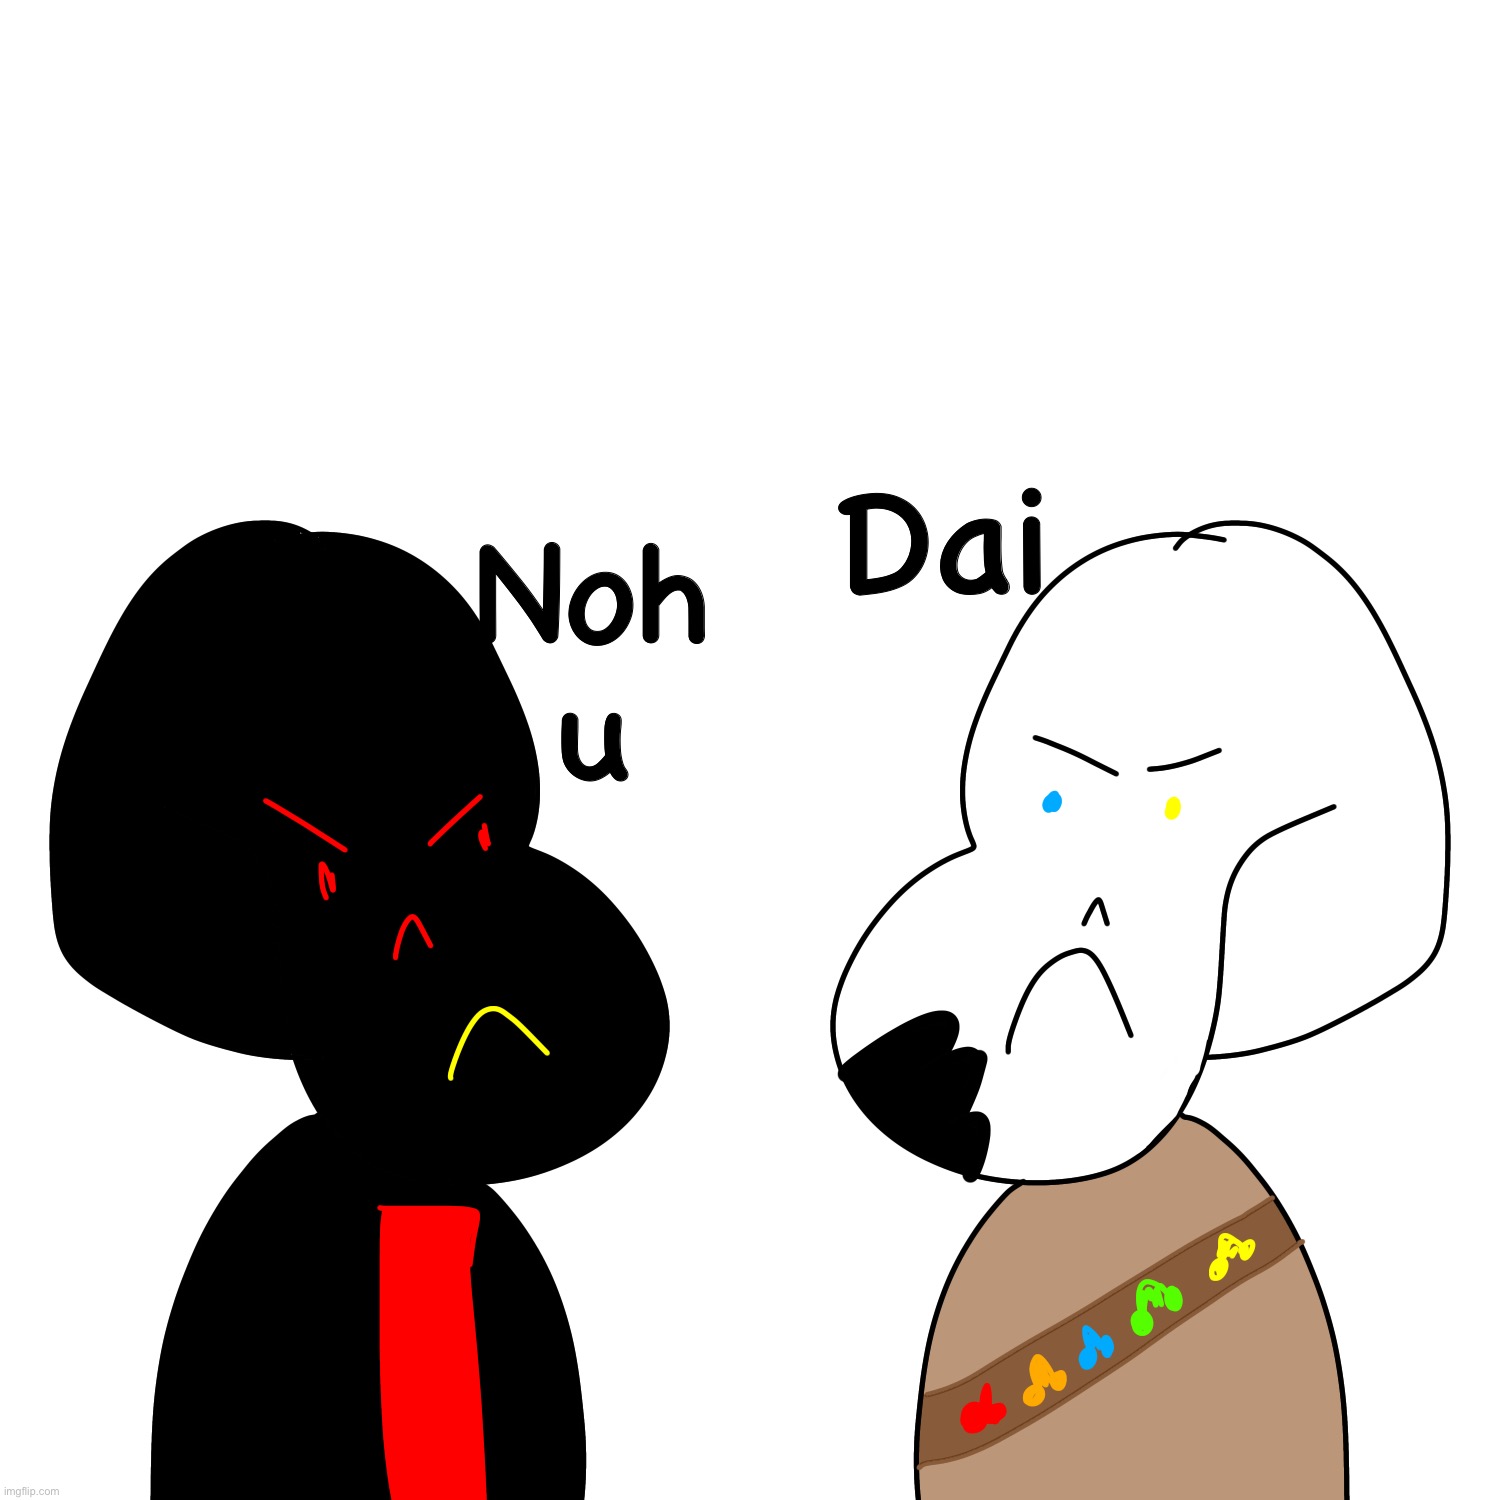 How to not draw with Psychocat: Enk Saes vs Errape Saes | Noh u; Dai | image tagged in memes,funny,sans,undertale,ink,error | made w/ Imgflip meme maker